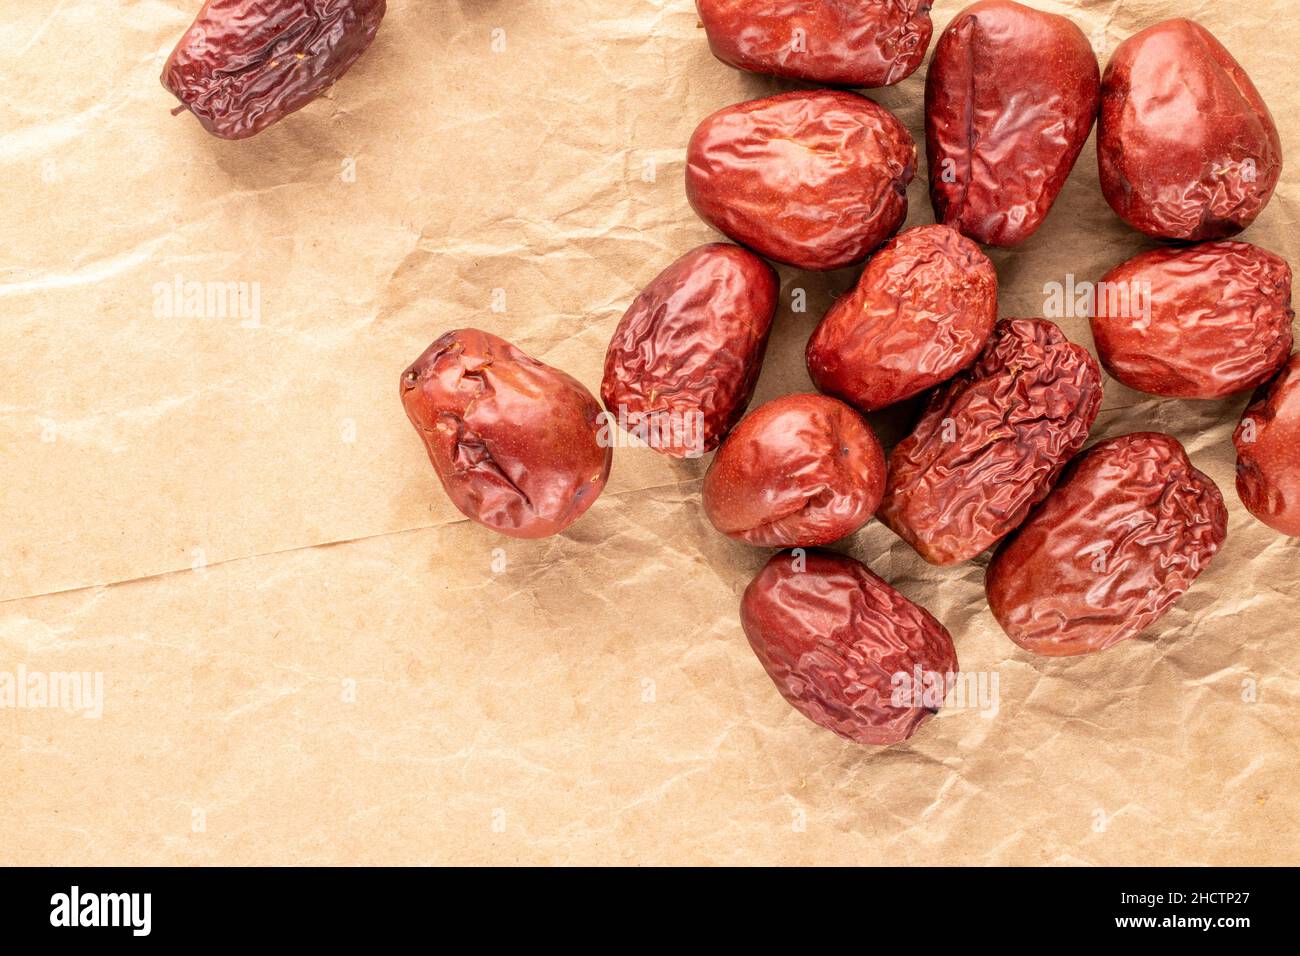 Several sweet dried ziziphus berries on craft paper, close-up, top view. Stock Photo